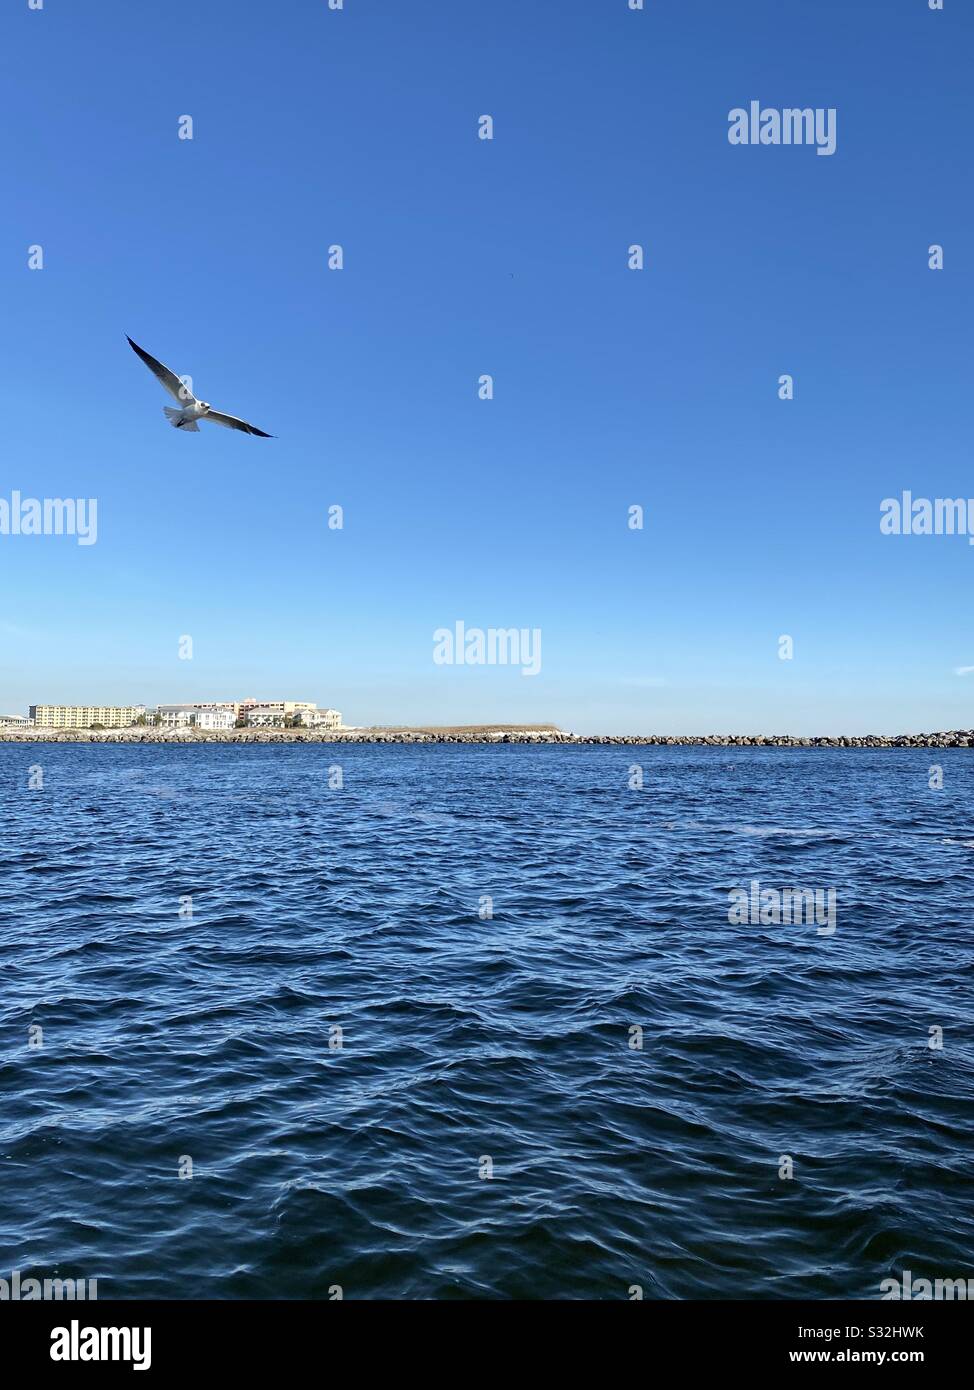 Boating the Gulf of Mexico with view of deep blue water, skies and a seagull flying over the water Stock Photo